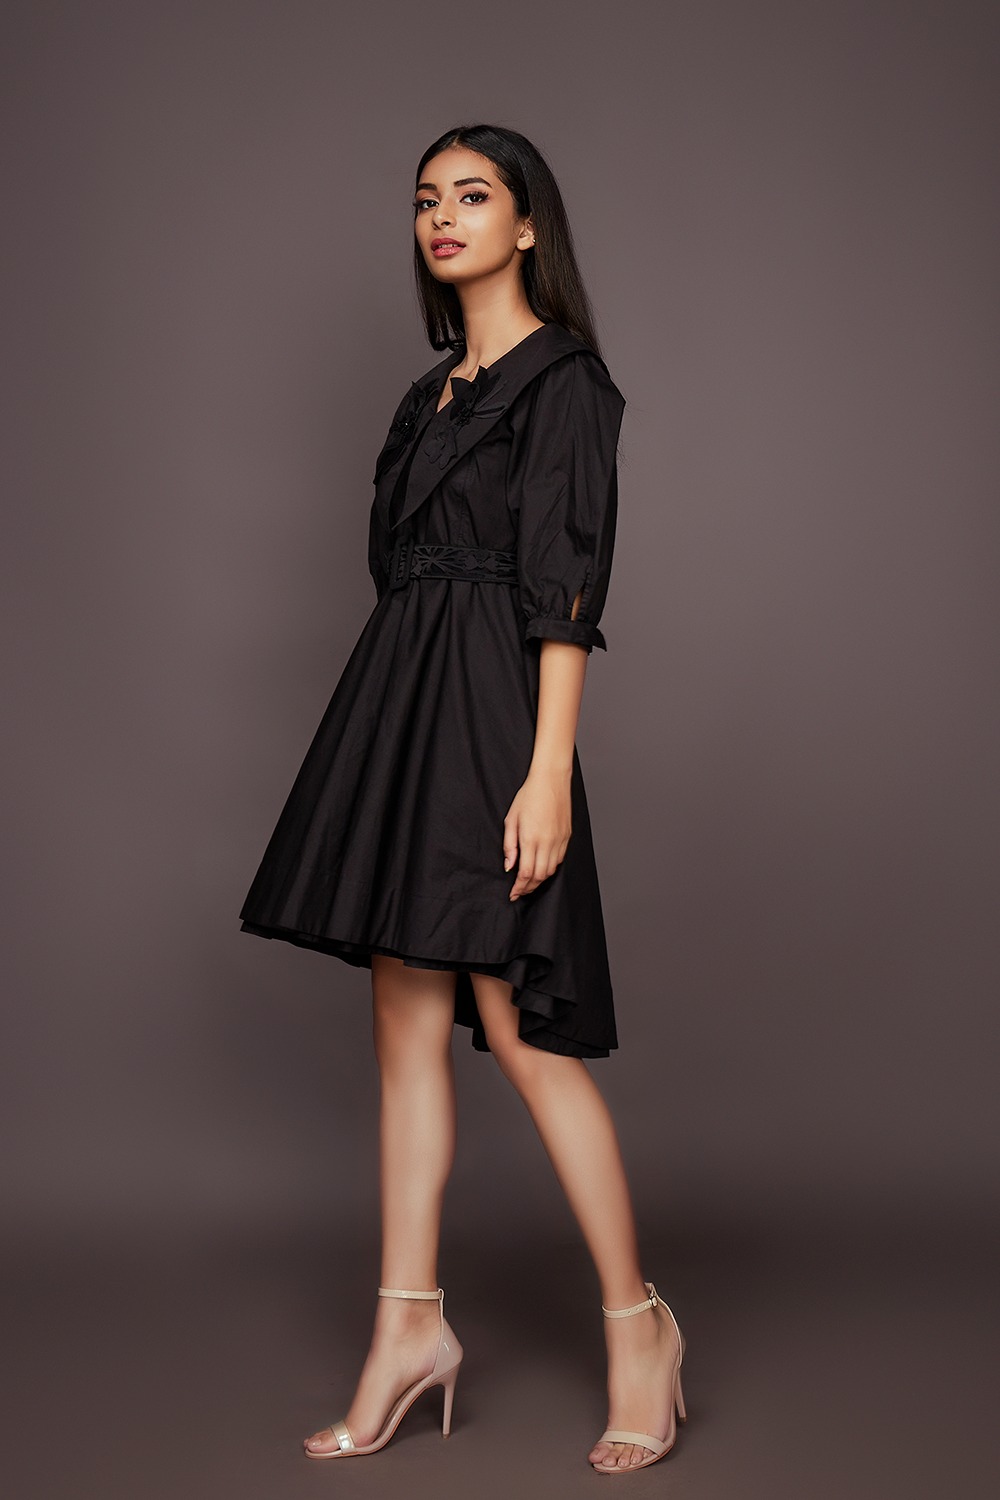 A-Line Cotton Dress With Cutwork Collar And Belt